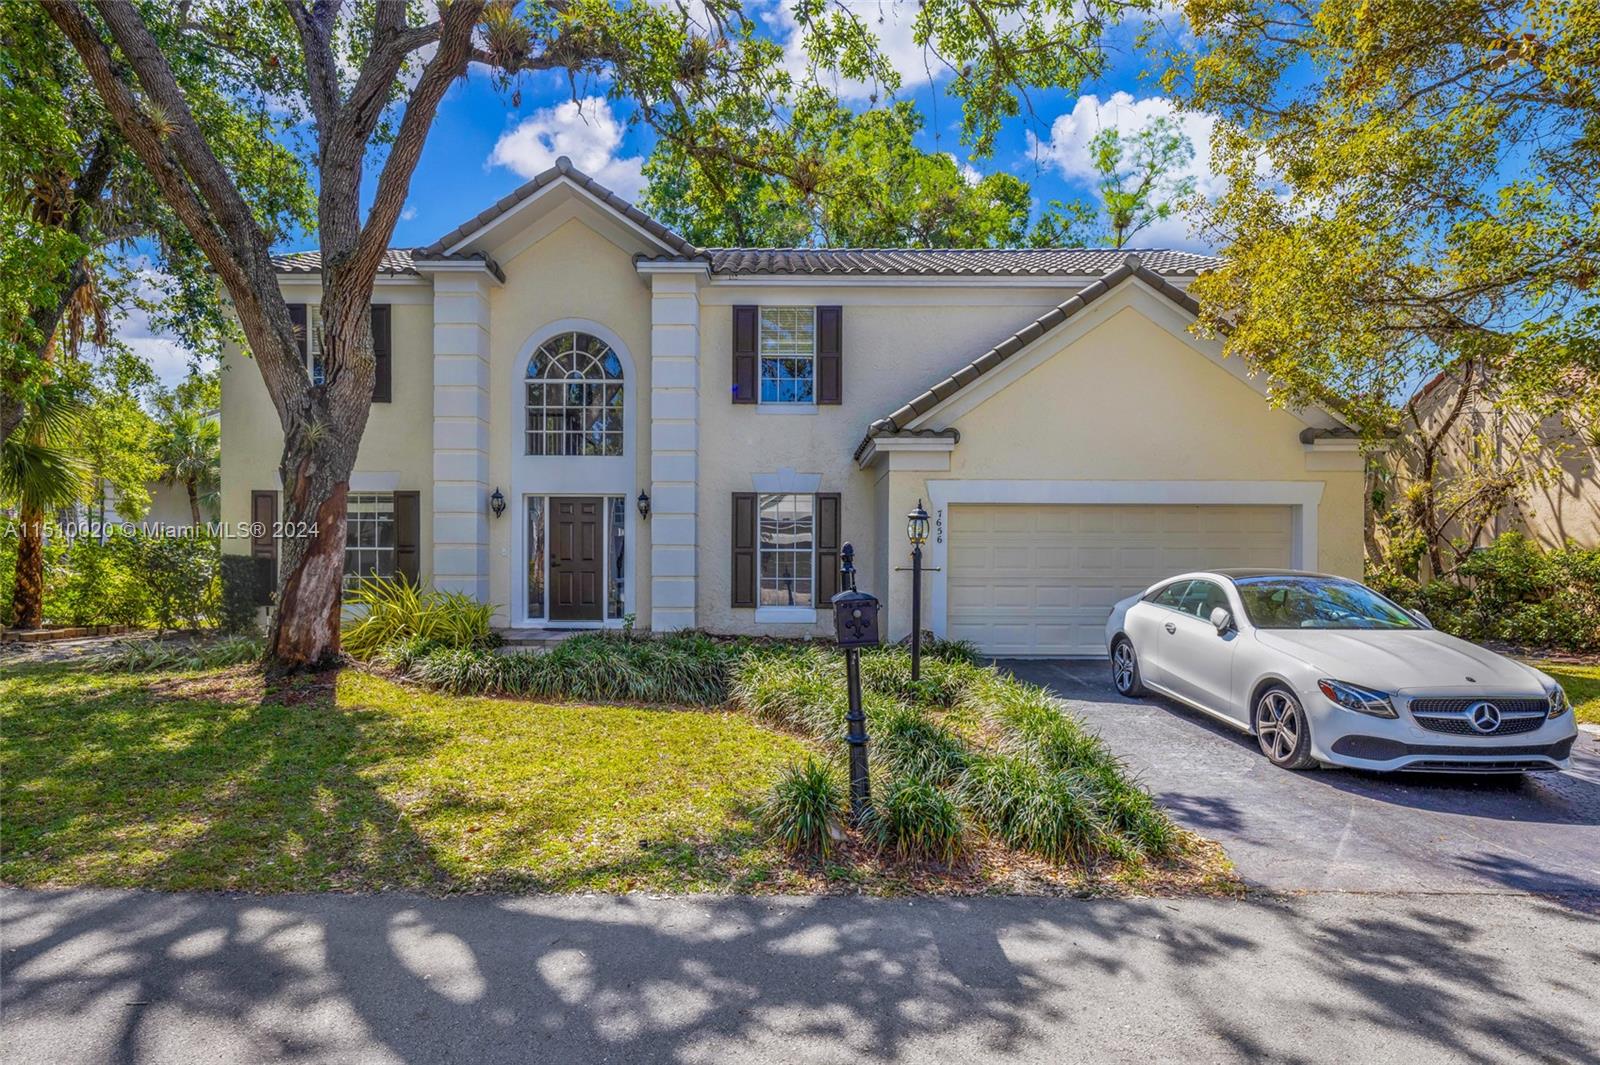 7656 Parkview Way, Coral Springs, Florida 33065, 4 Bedrooms Bedrooms, ,2 BathroomsBathrooms,Residential,For Sale,7656 Parkview Way,A11510020